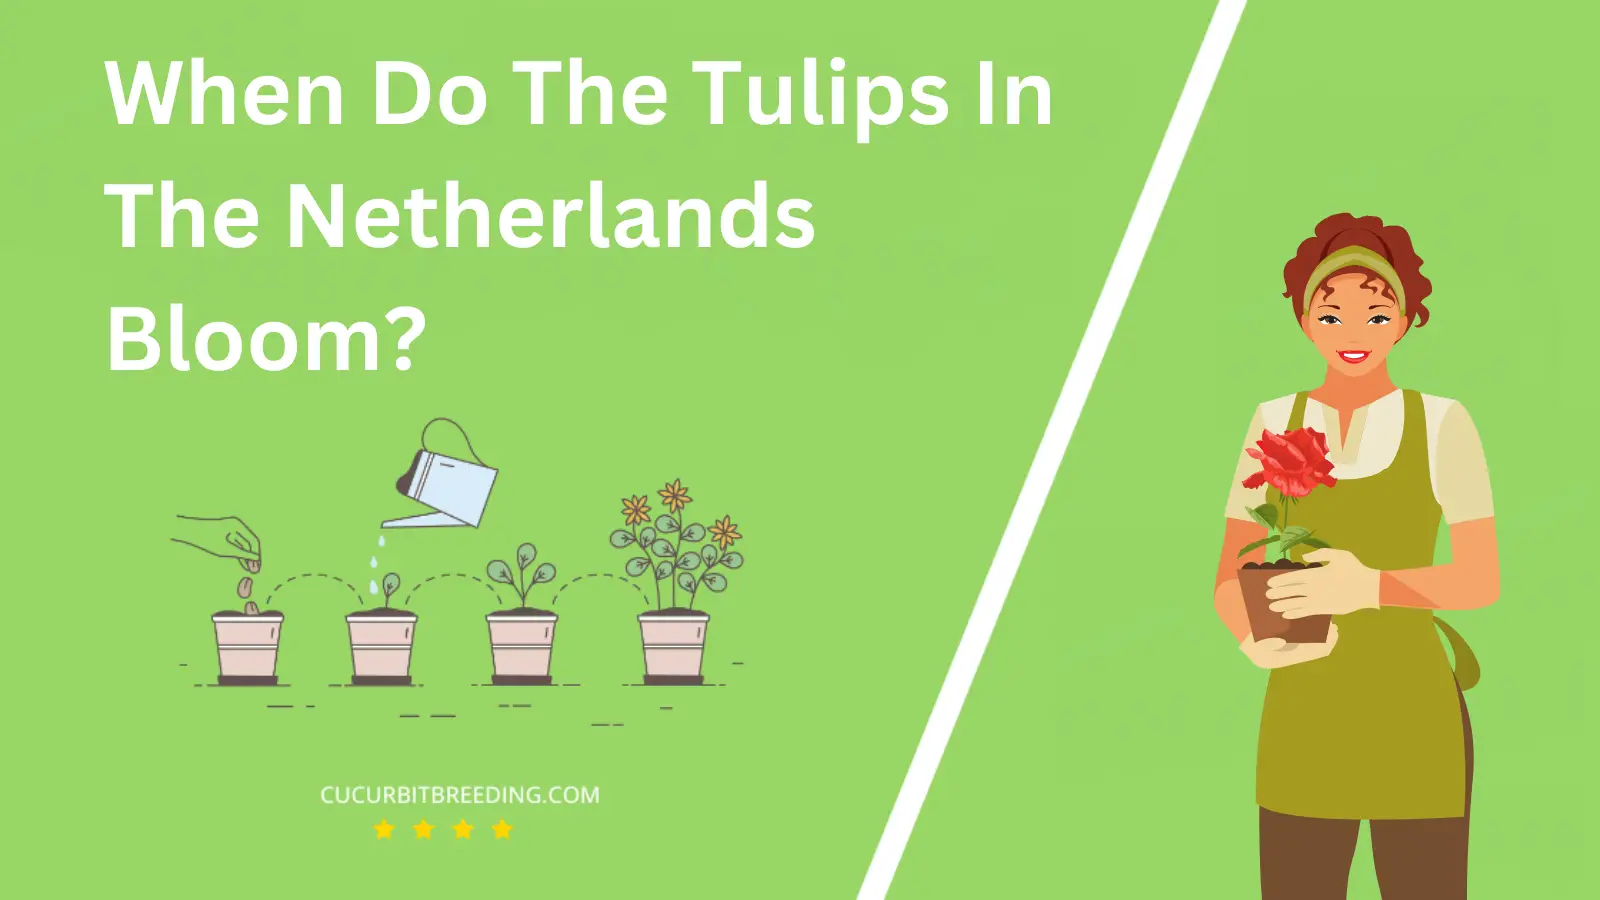 When Do The Tulips In The Netherlands Bloom?